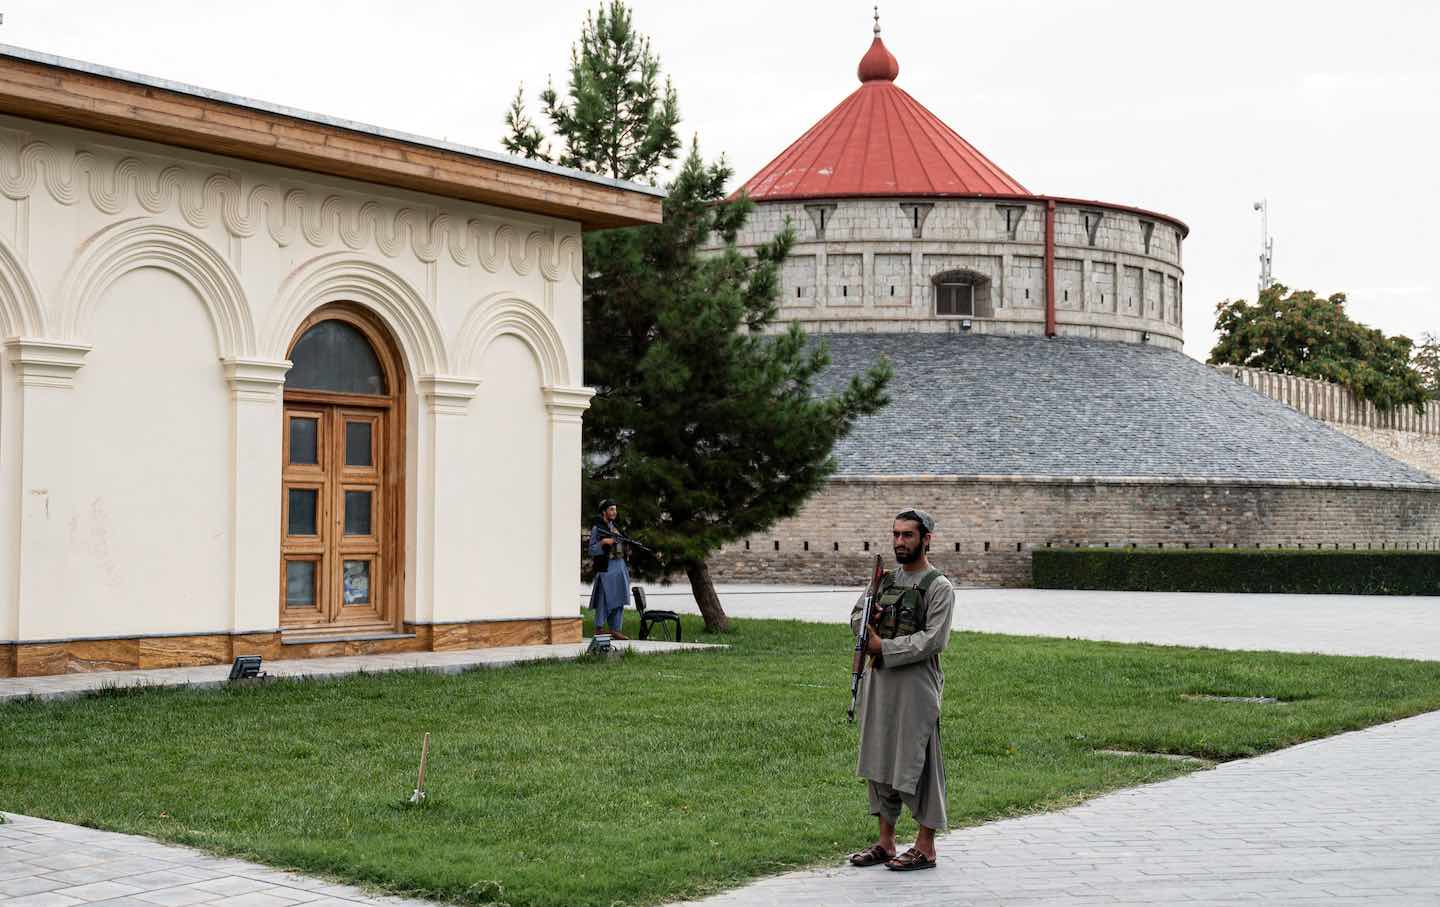 Taliban fighters stand guard outside the former presidential palace in Kabul on August 13, 2022.